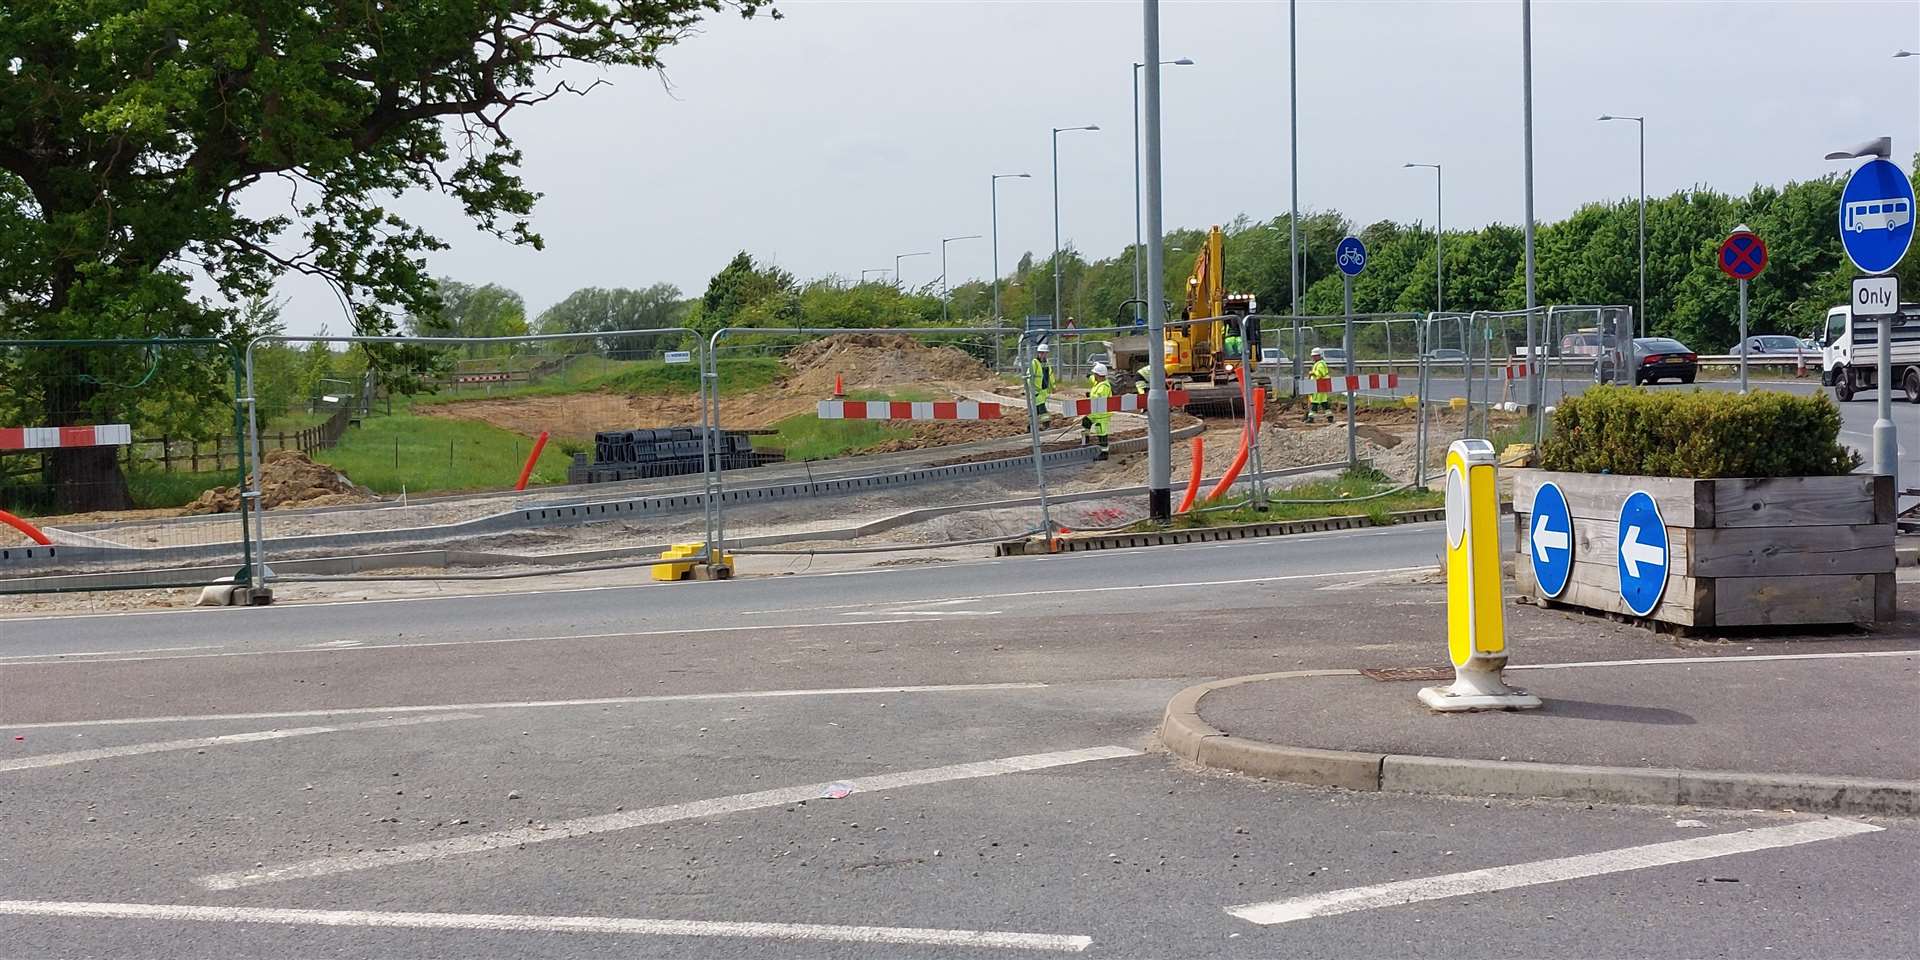 Drivers from Finberry will be able to turn right onto the A2070 for the first time once the scheme is complete